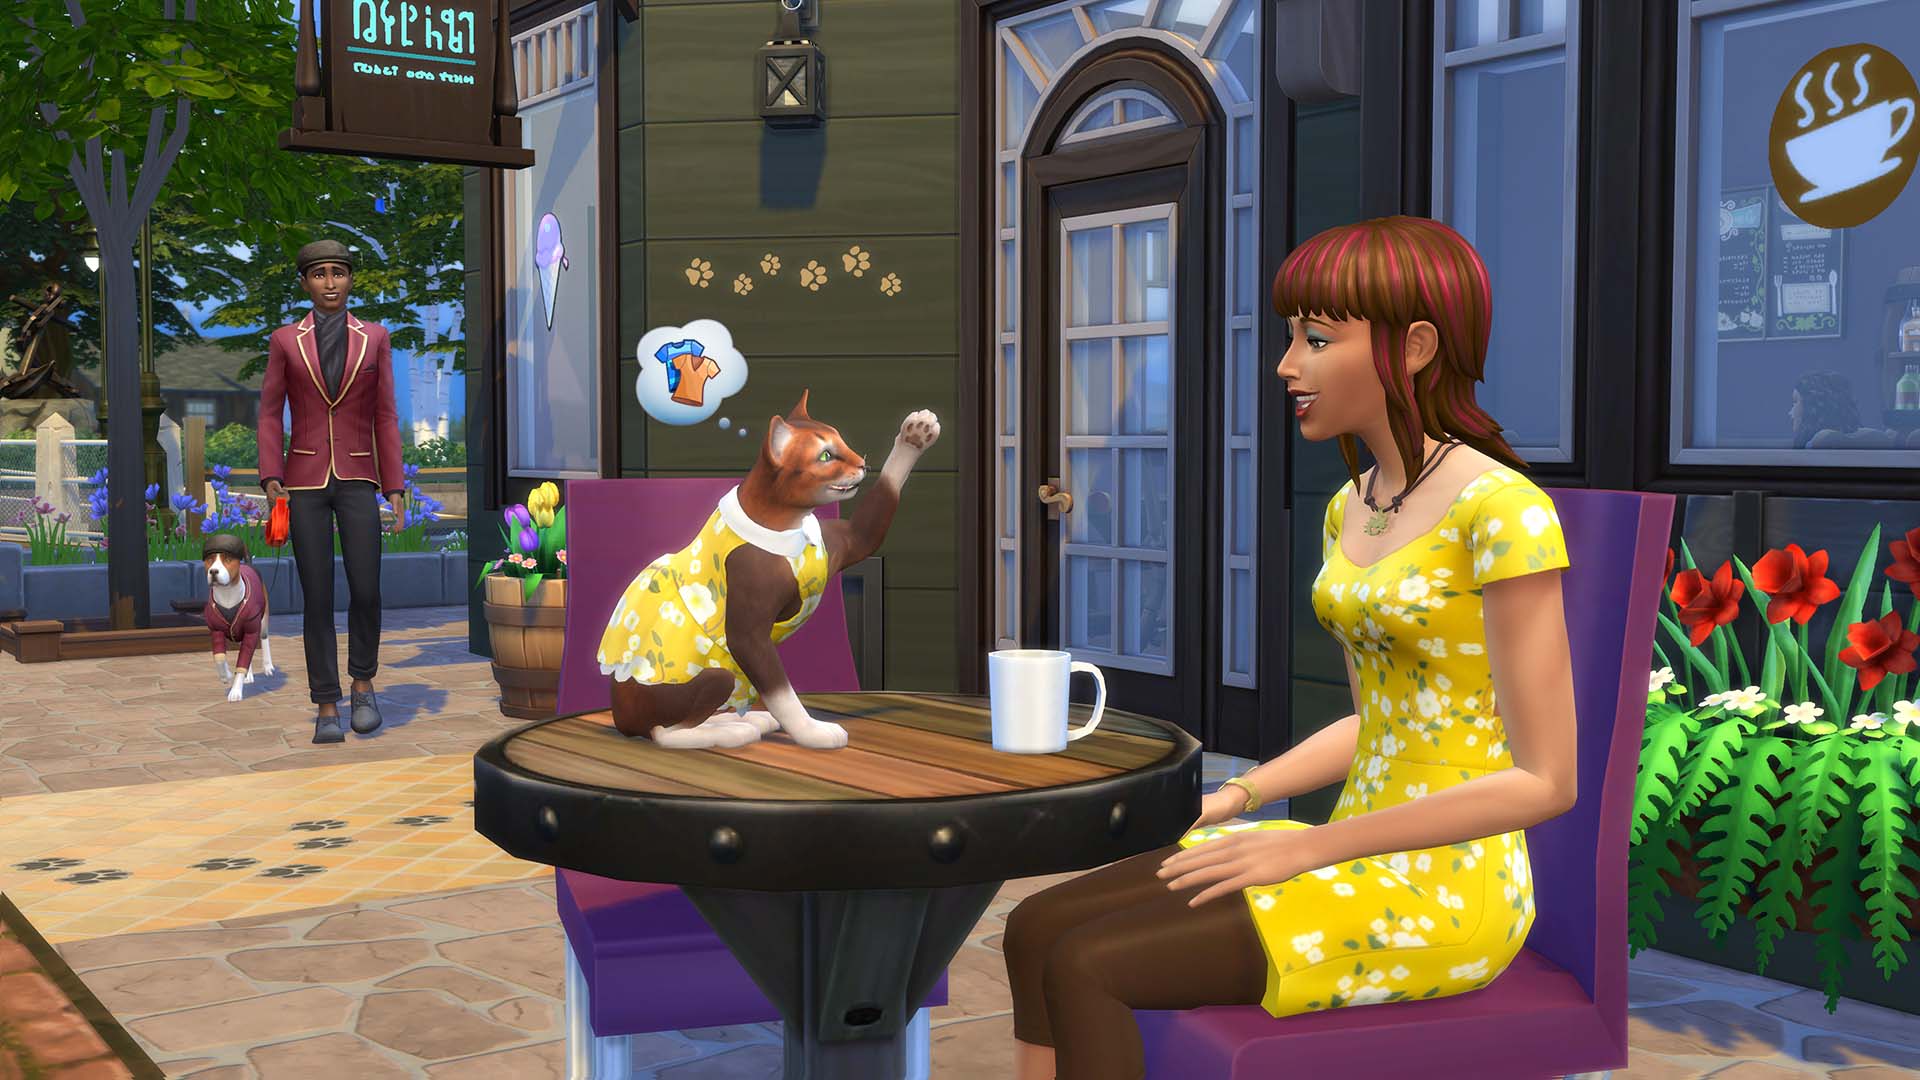 The Sims 4 Cats and Dogs screenshot showing a Sim at a cafe with a cat.